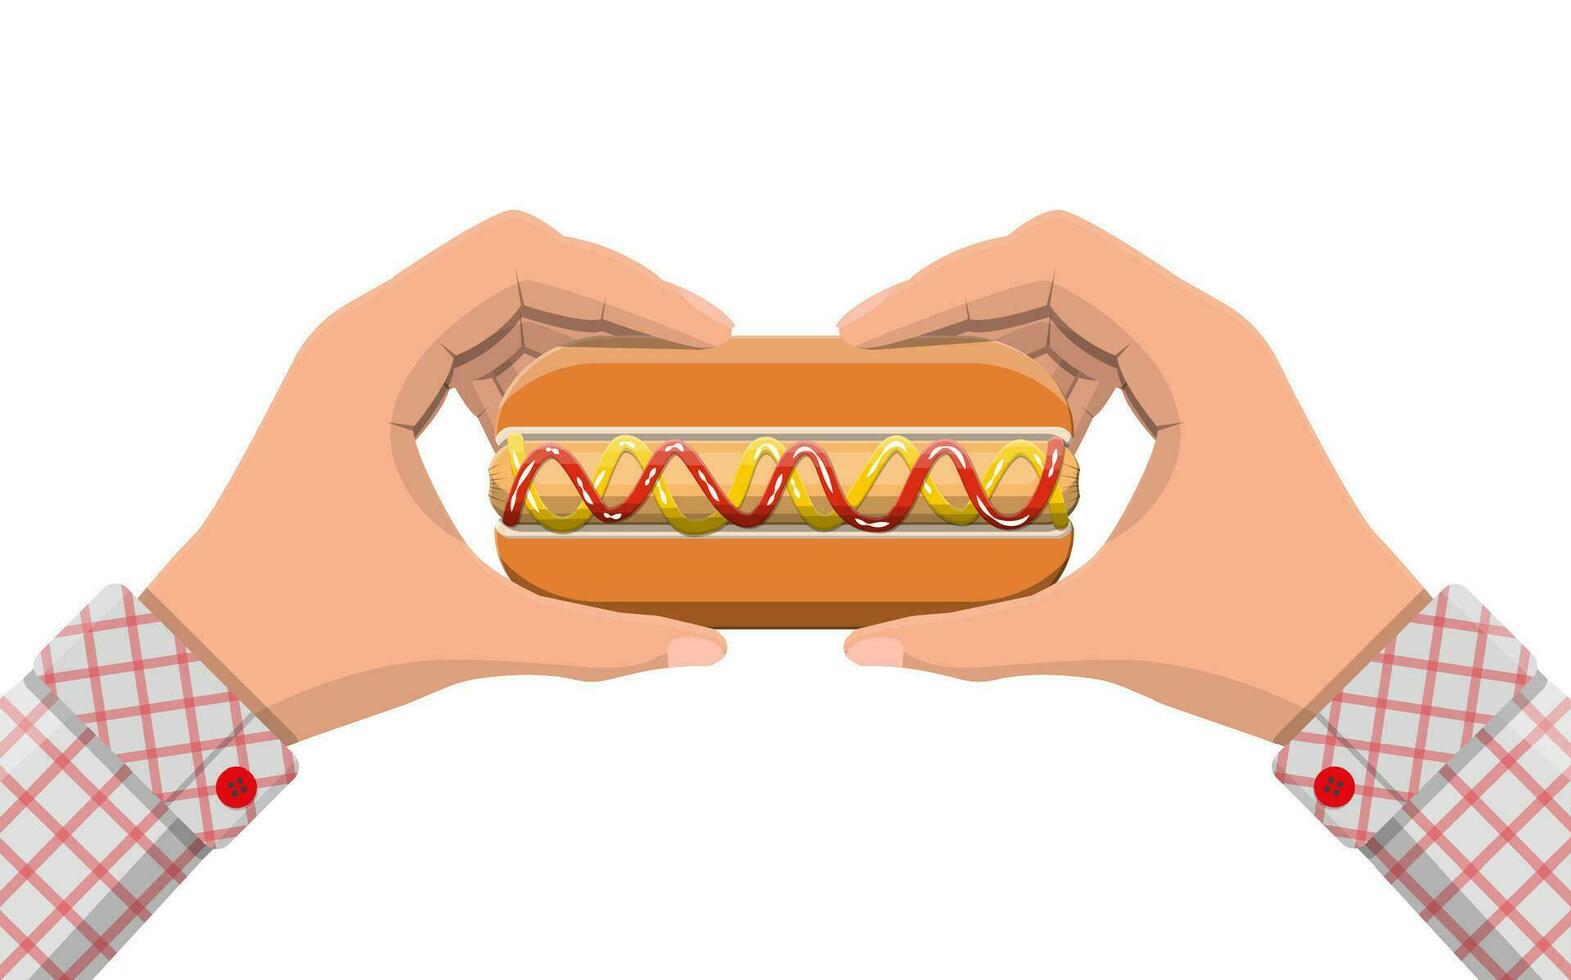 Hotdog in hands. Sausage with bun, mustard and ketchup. Fast food concept. Vector illustration in flat style